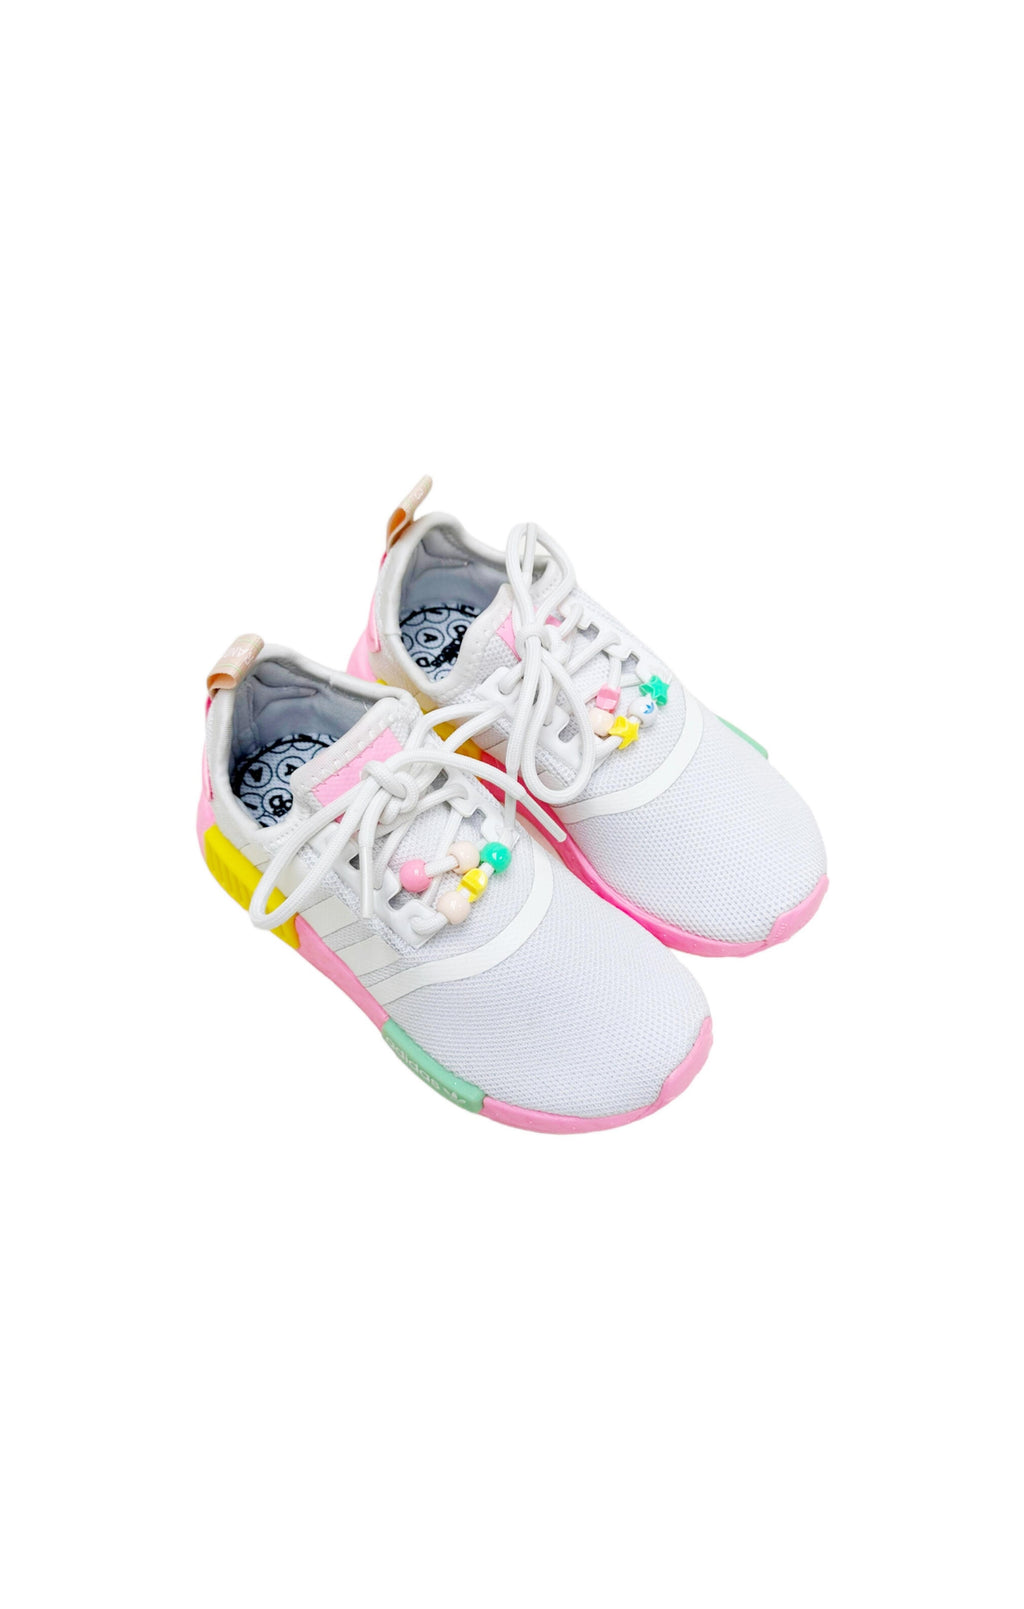 ADIDAS (RARE & NEW) Sneakers Size: Toddler US 11K